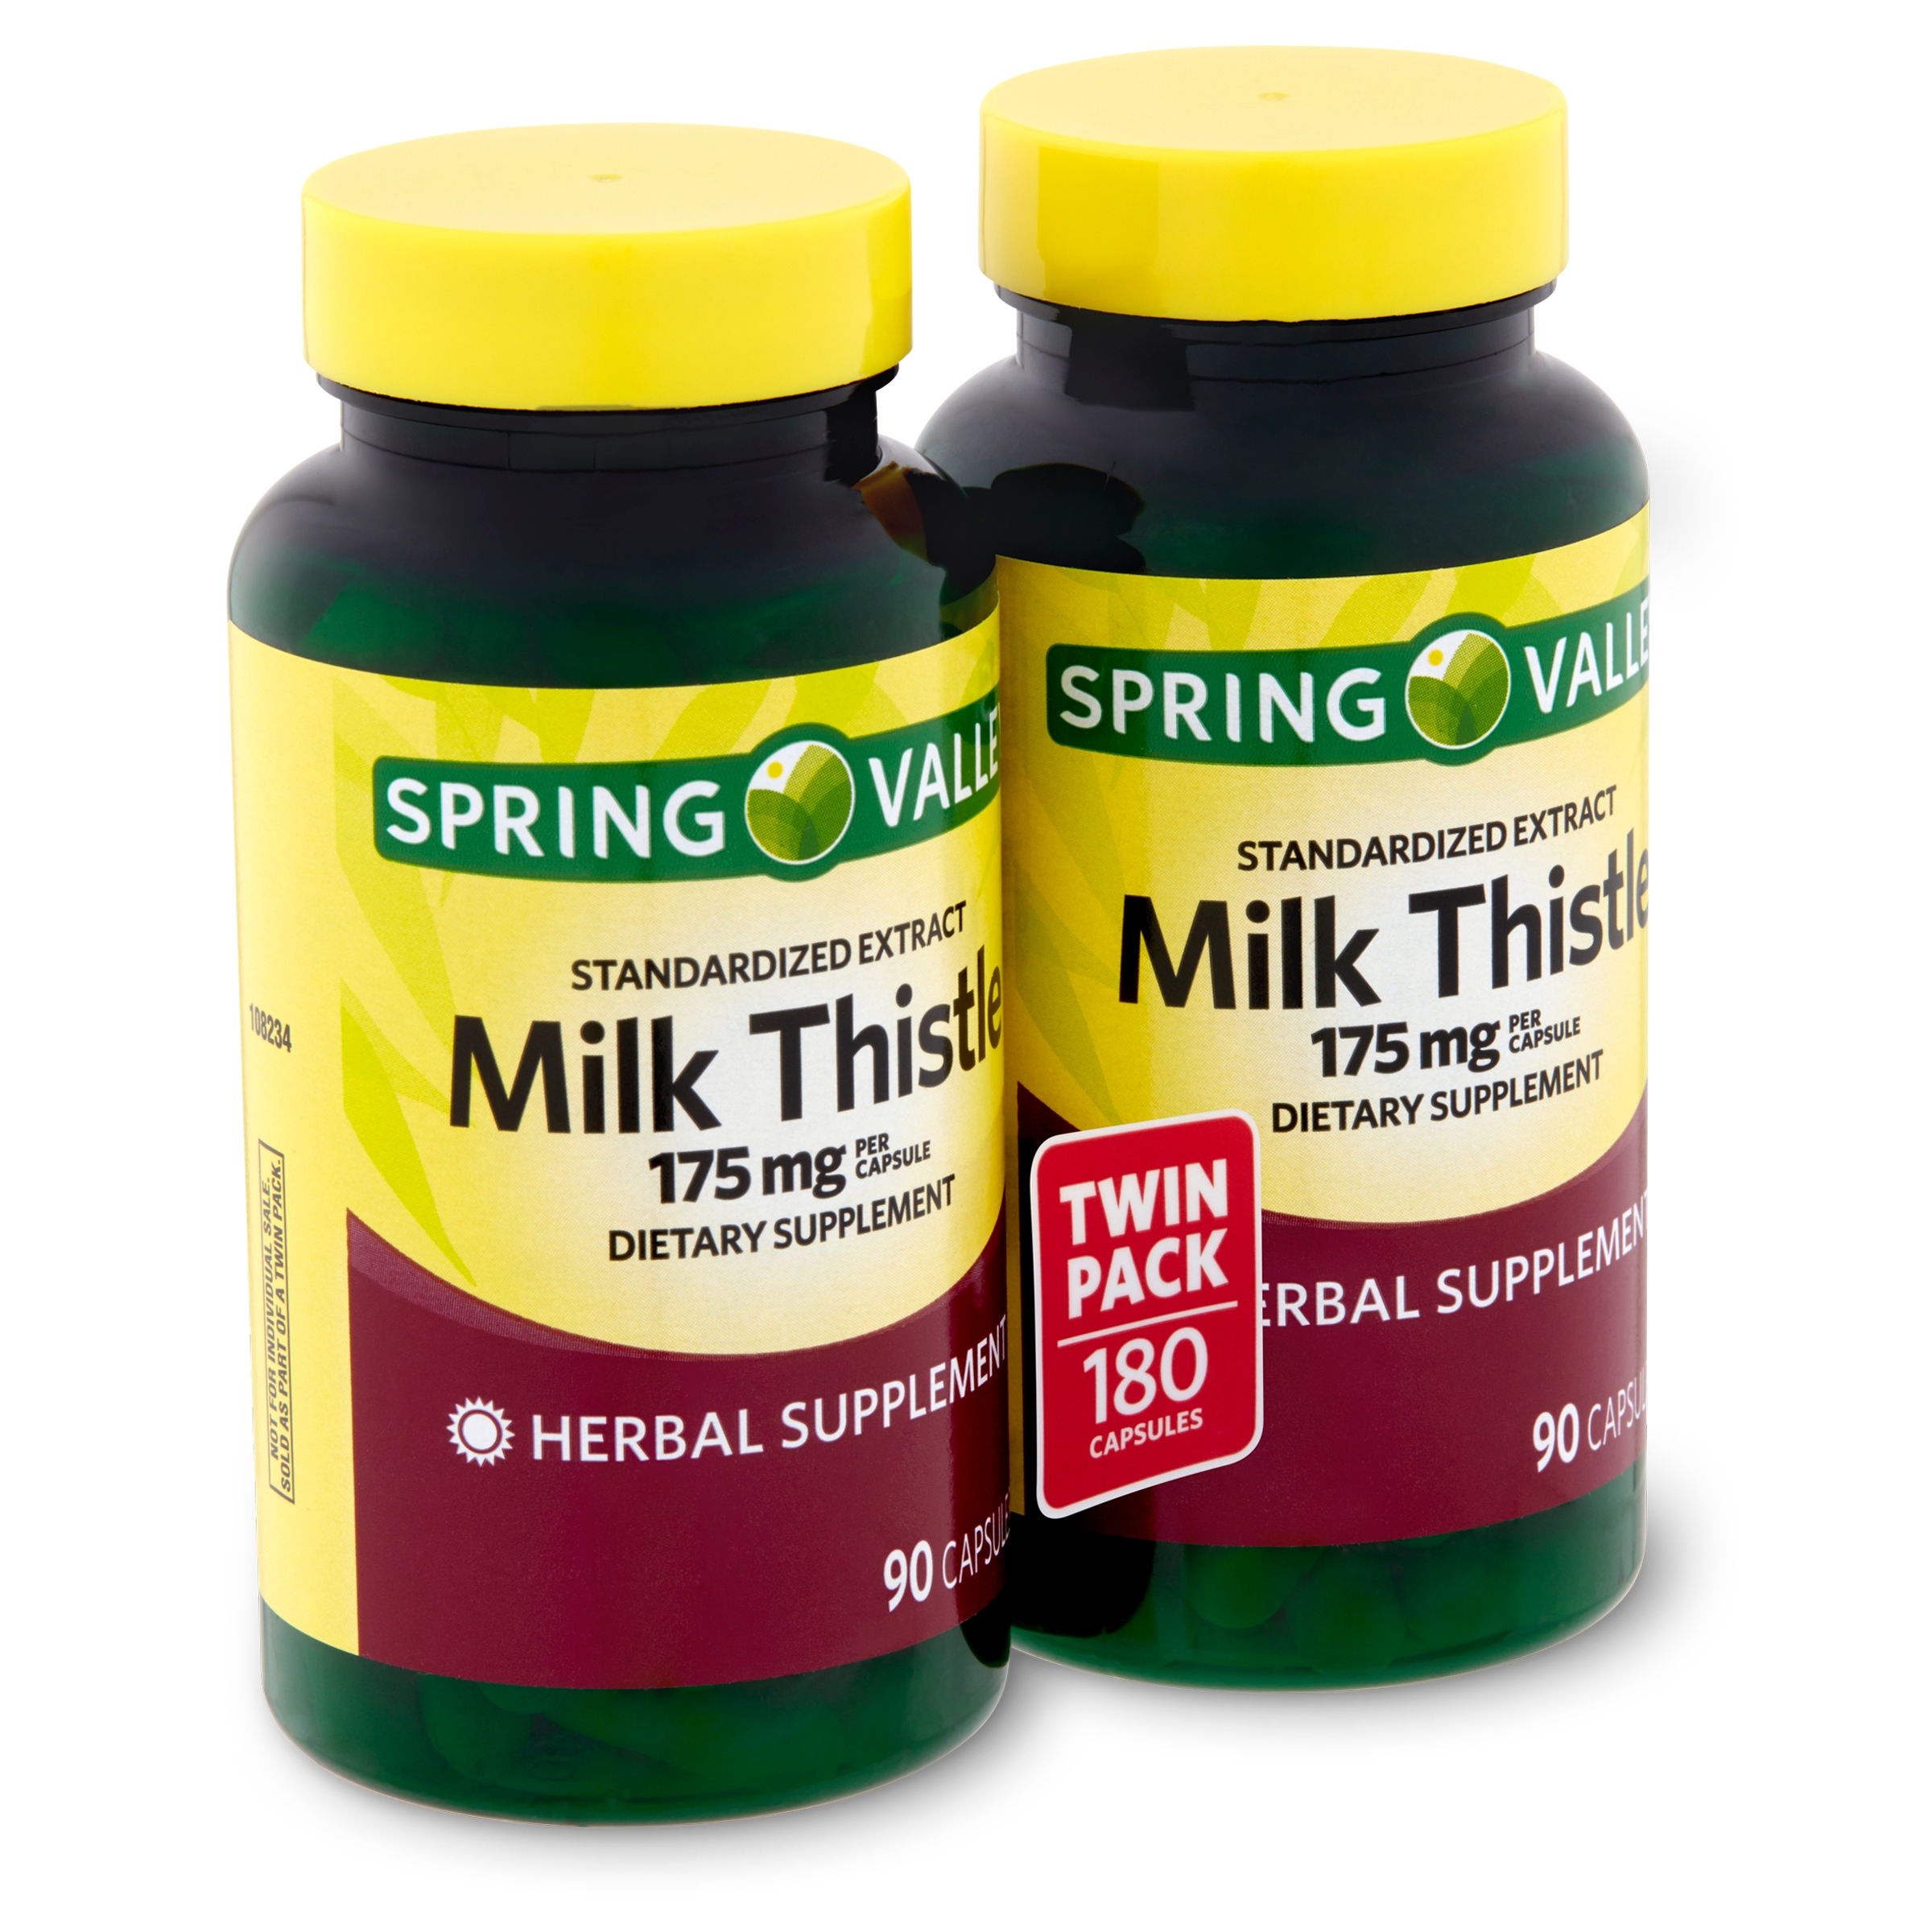 Spring Valley Standardized Extract Milk Thistle Dietary Supplement Capsules Twin Pack, 175 mg, 1180 Count - image 2 of 8